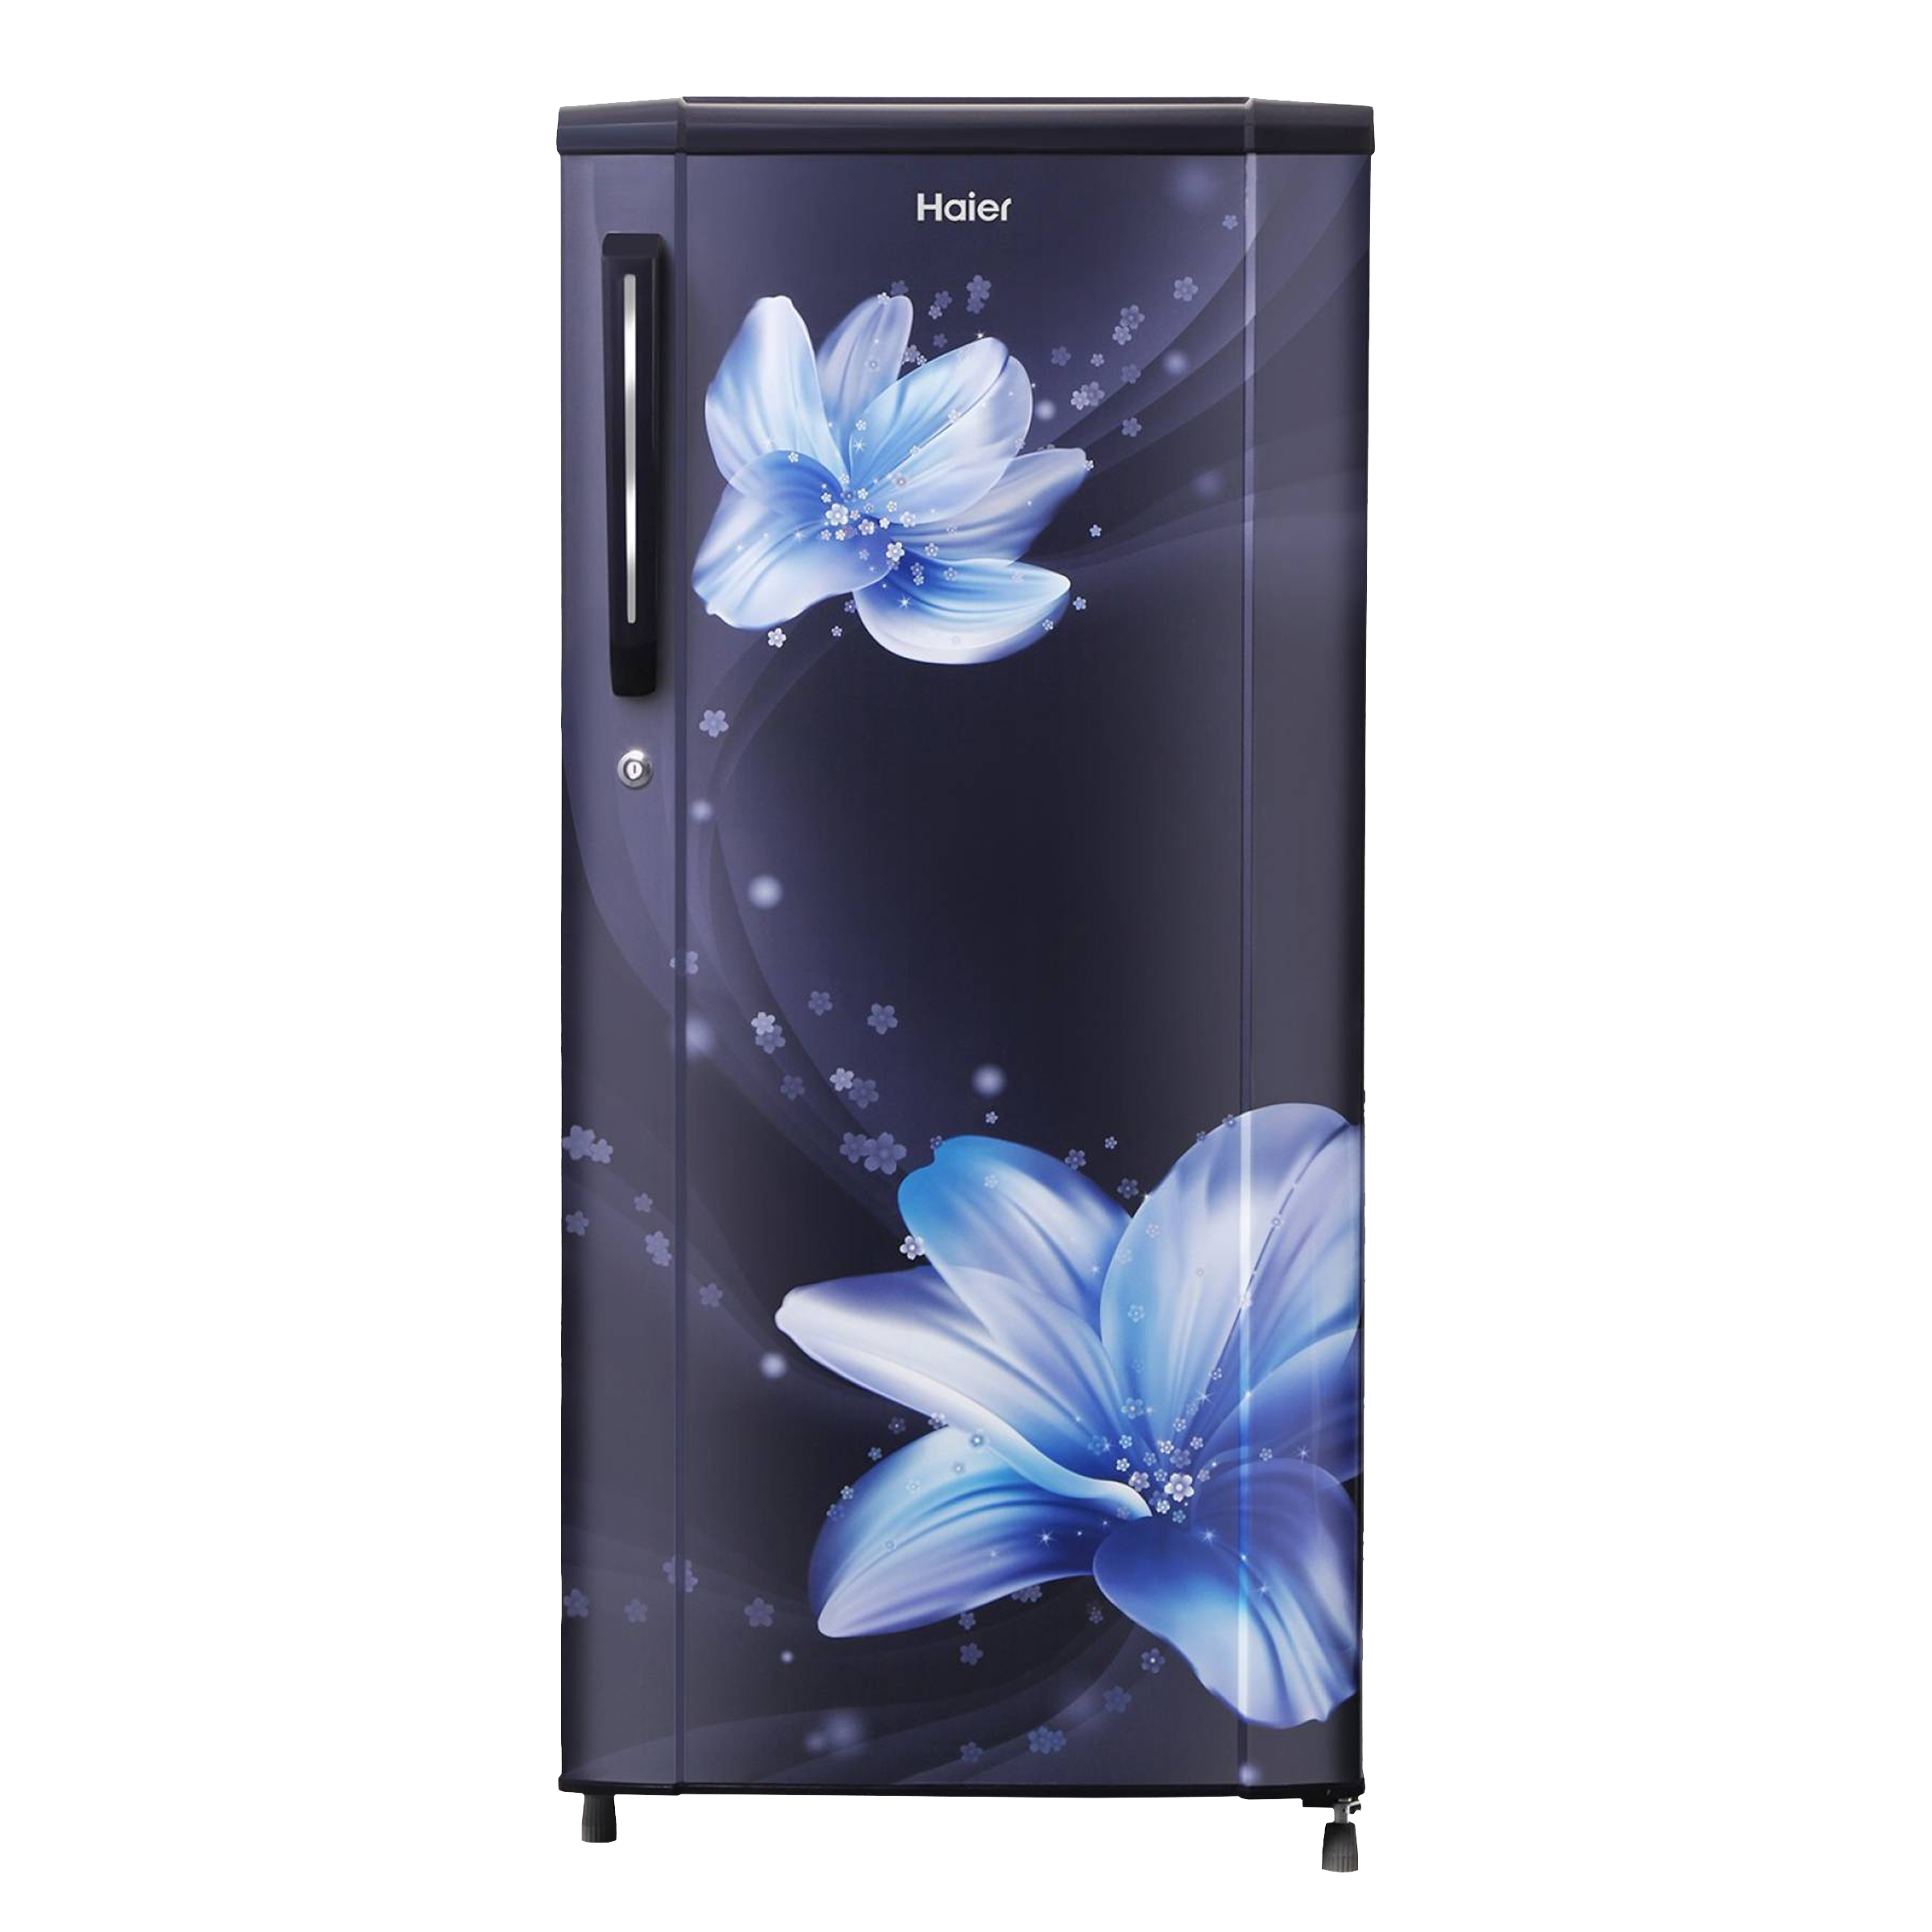 Haier 190 Liters 2 Star Direct Cool Single Door Refrigerator with Stabilizer Free Operation (HED-19TMF, Marine Serenity)_1